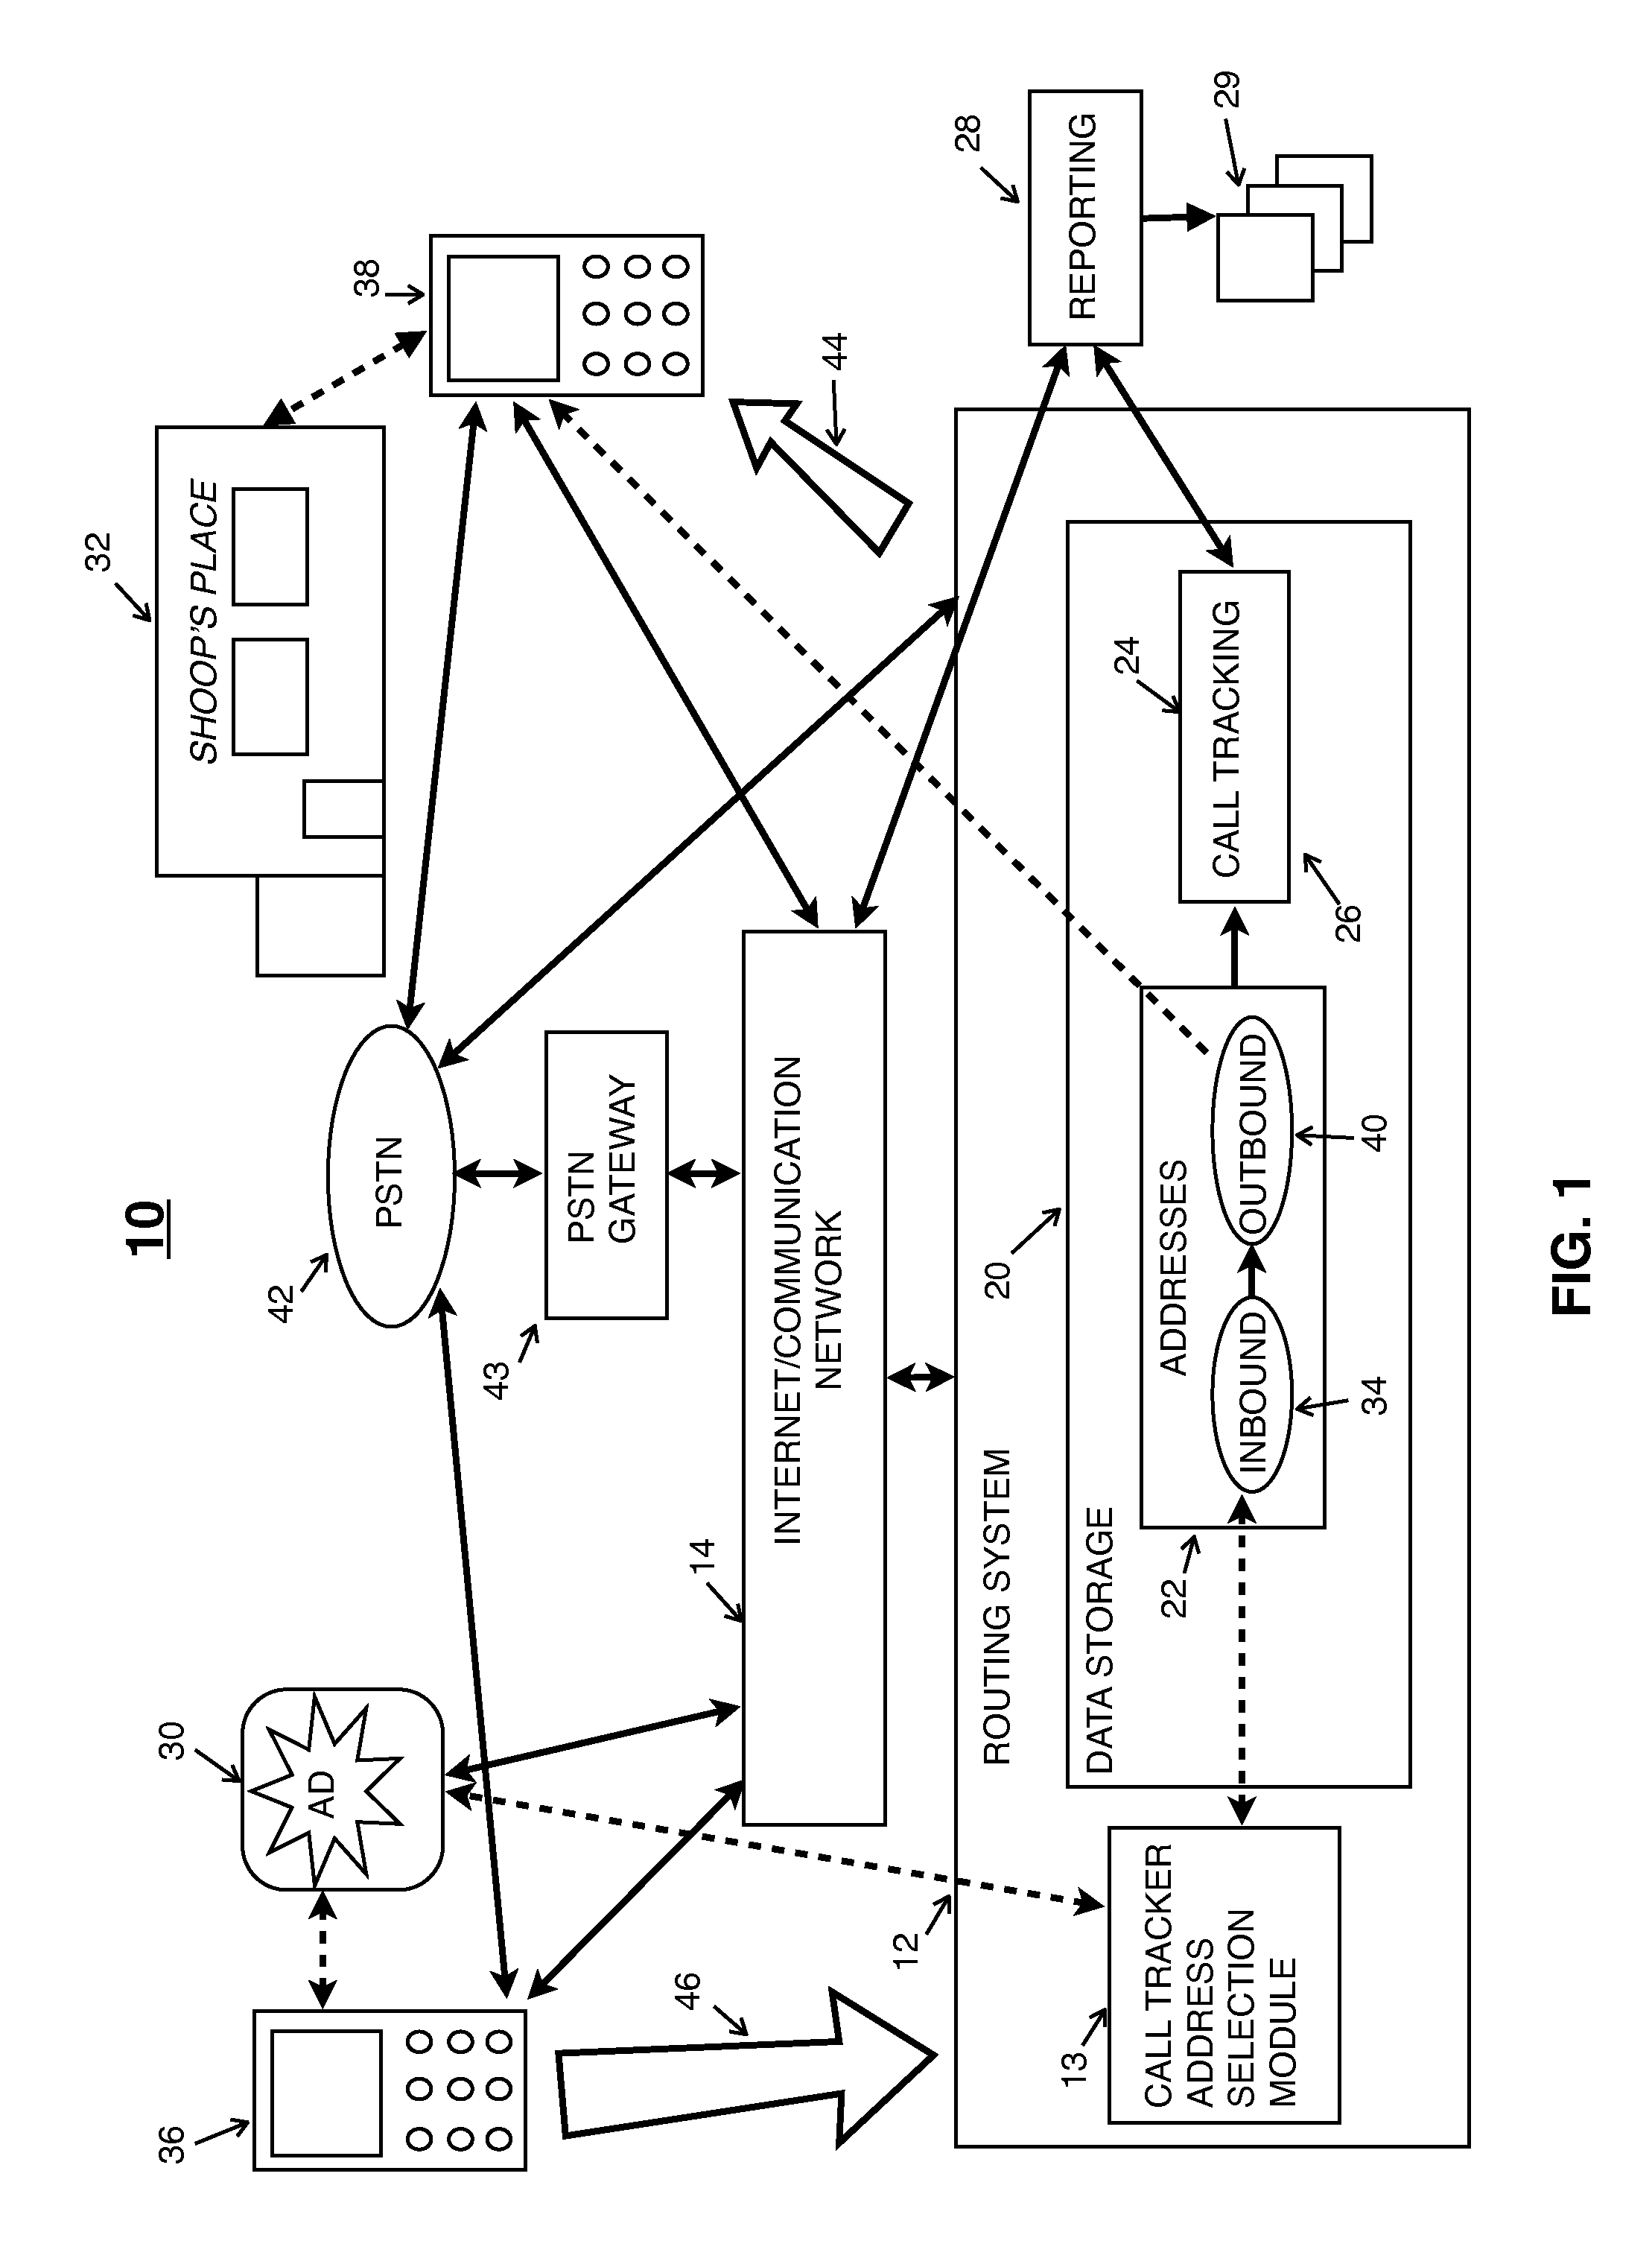 Systems and methods for mobile call measurement